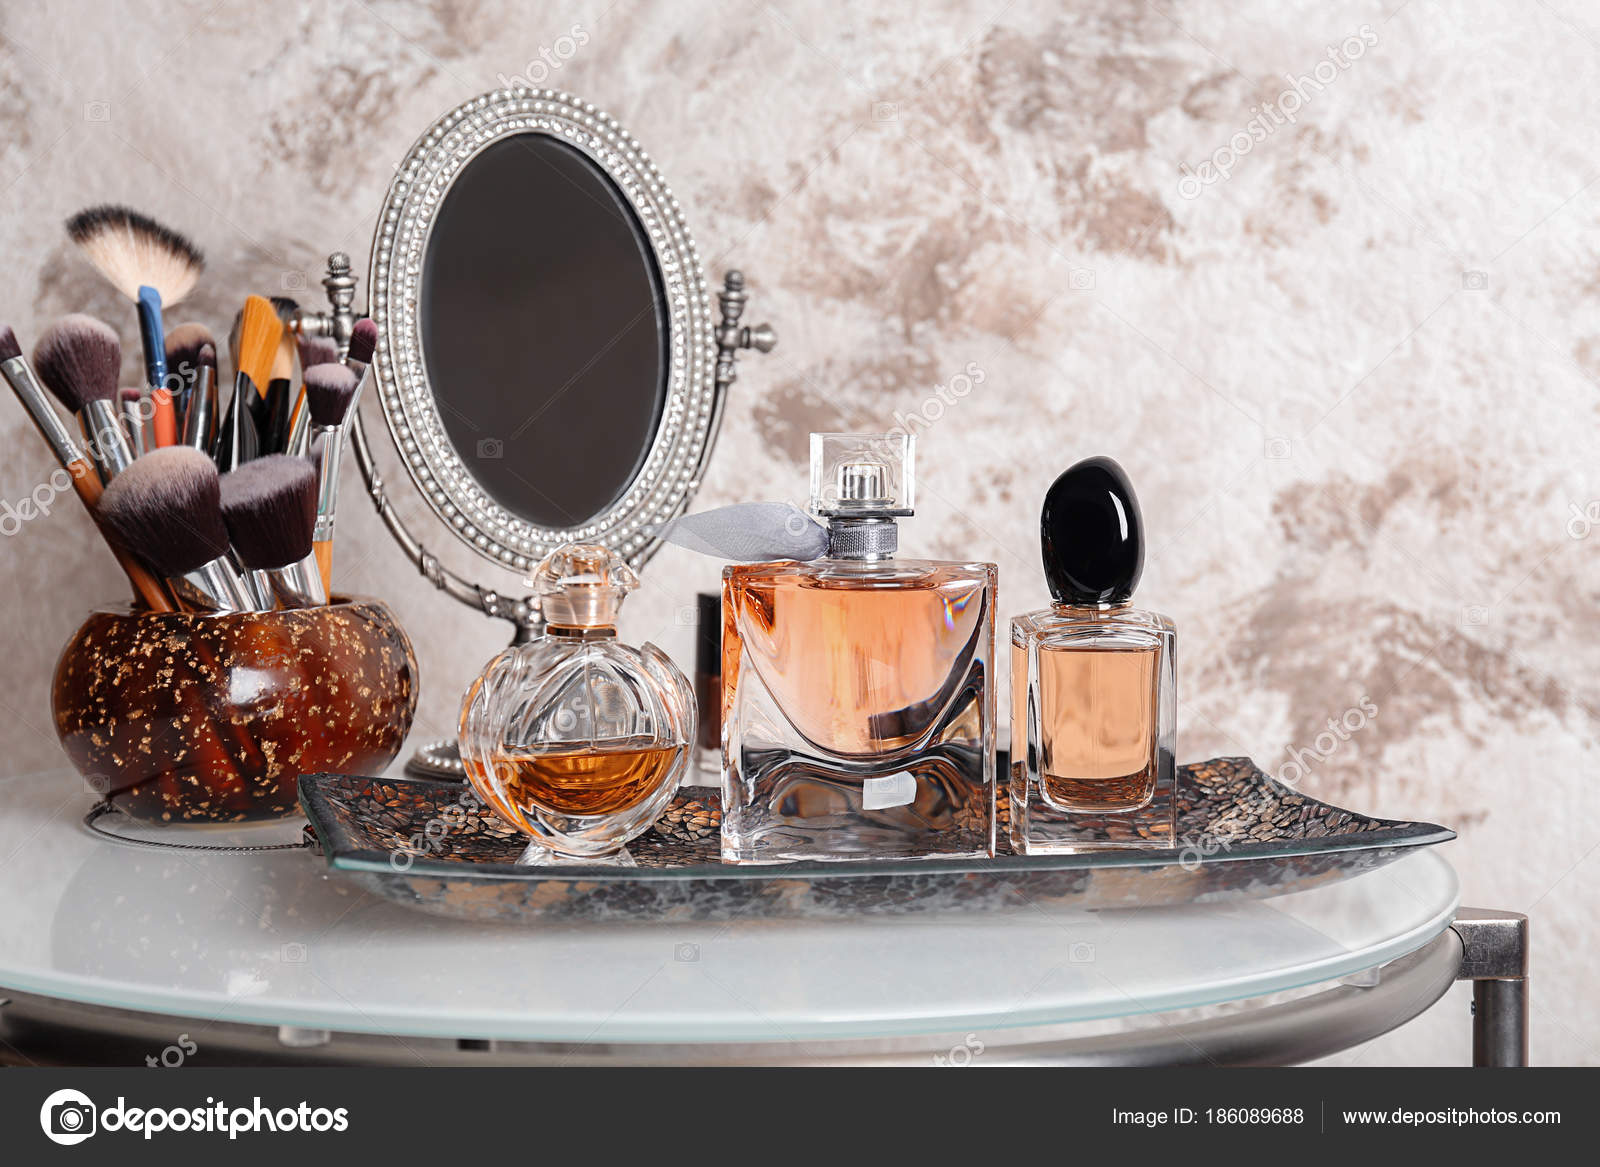 A bottle of perfume sitting on top of a table photo – Free Perfume